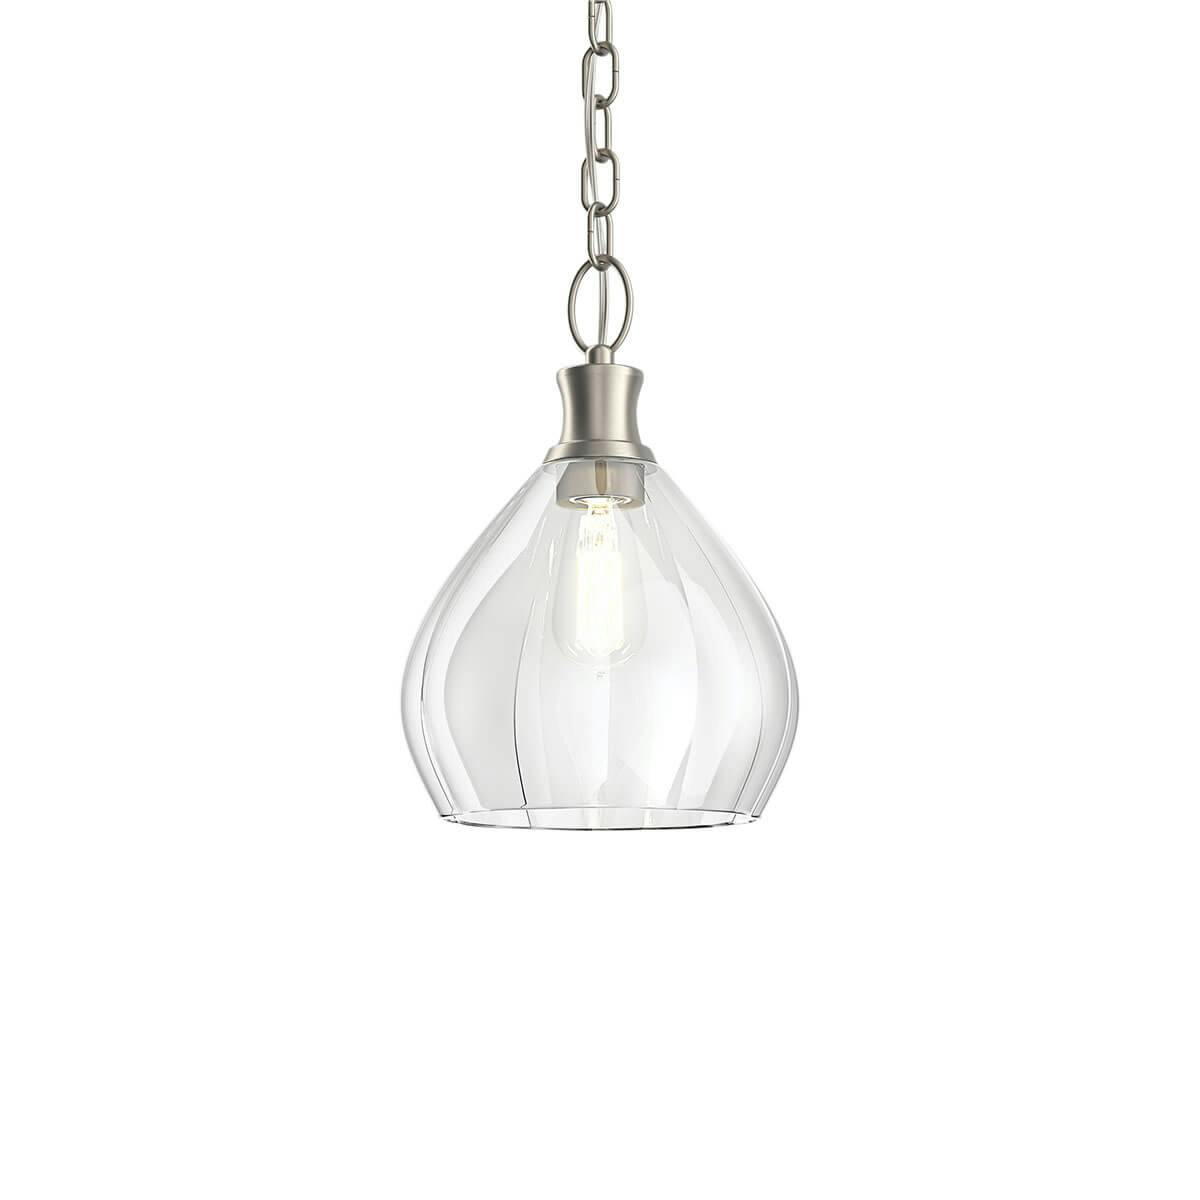 Merriam 8" 1 Light Pendant Brushed Nickel without the canopy on a white background